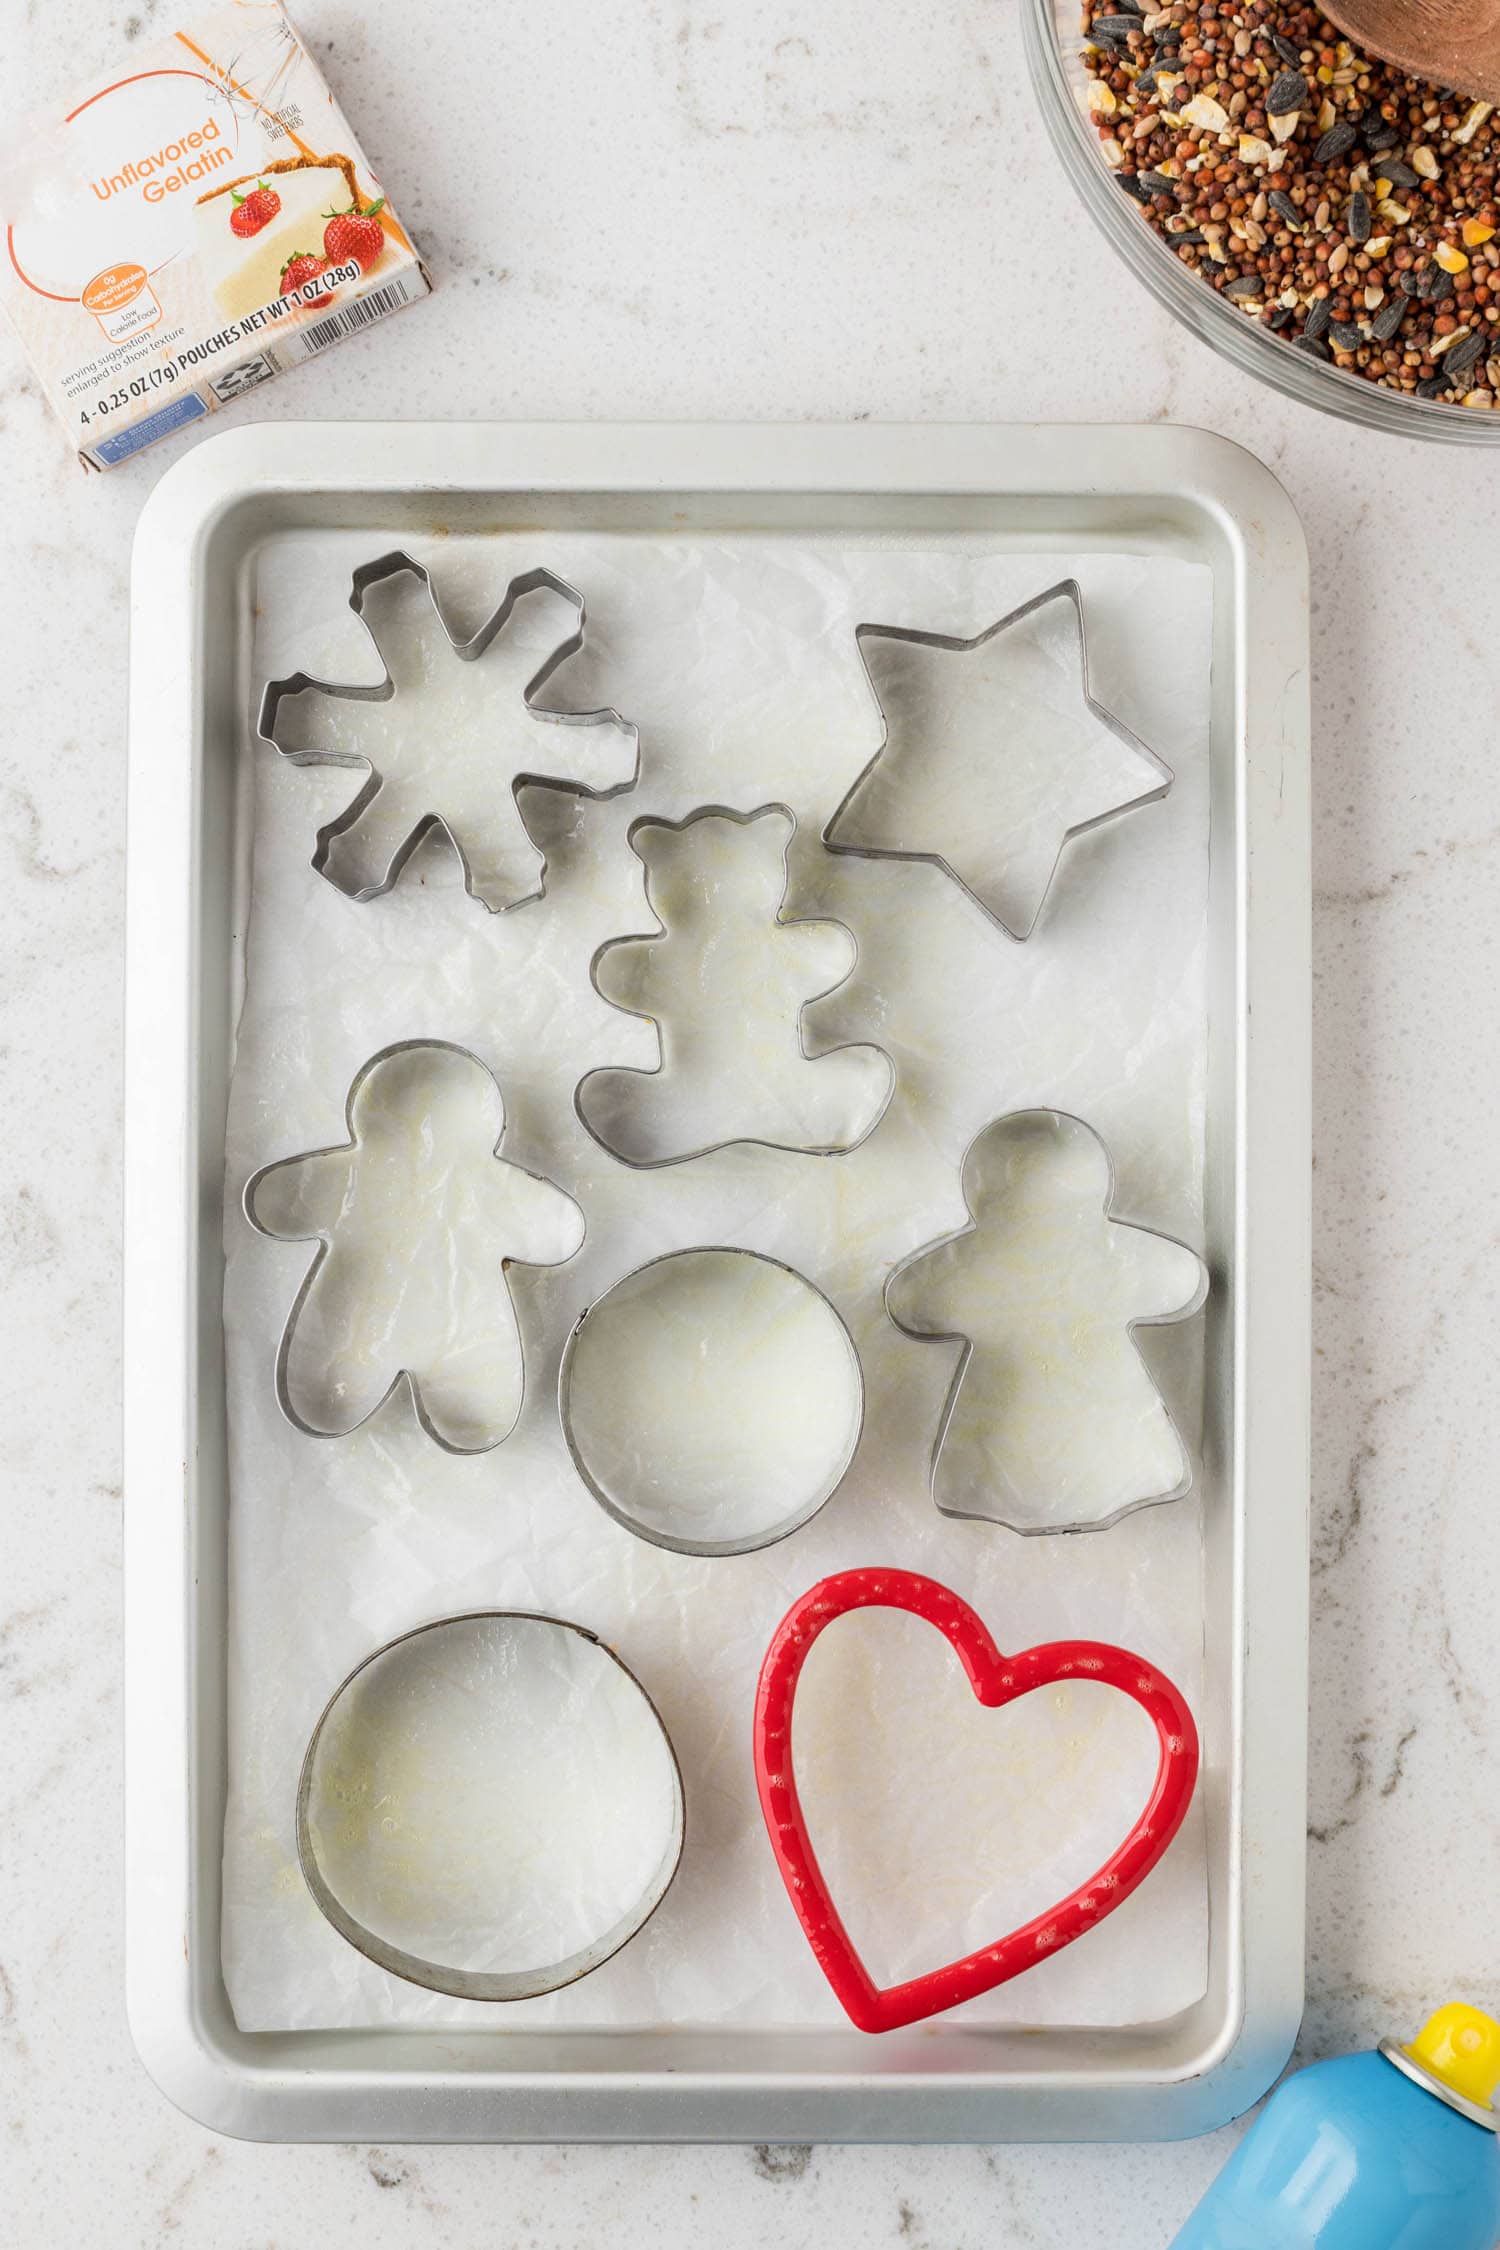 Lay down parchment paper on the cookie sheet and lay out your cookie cutters